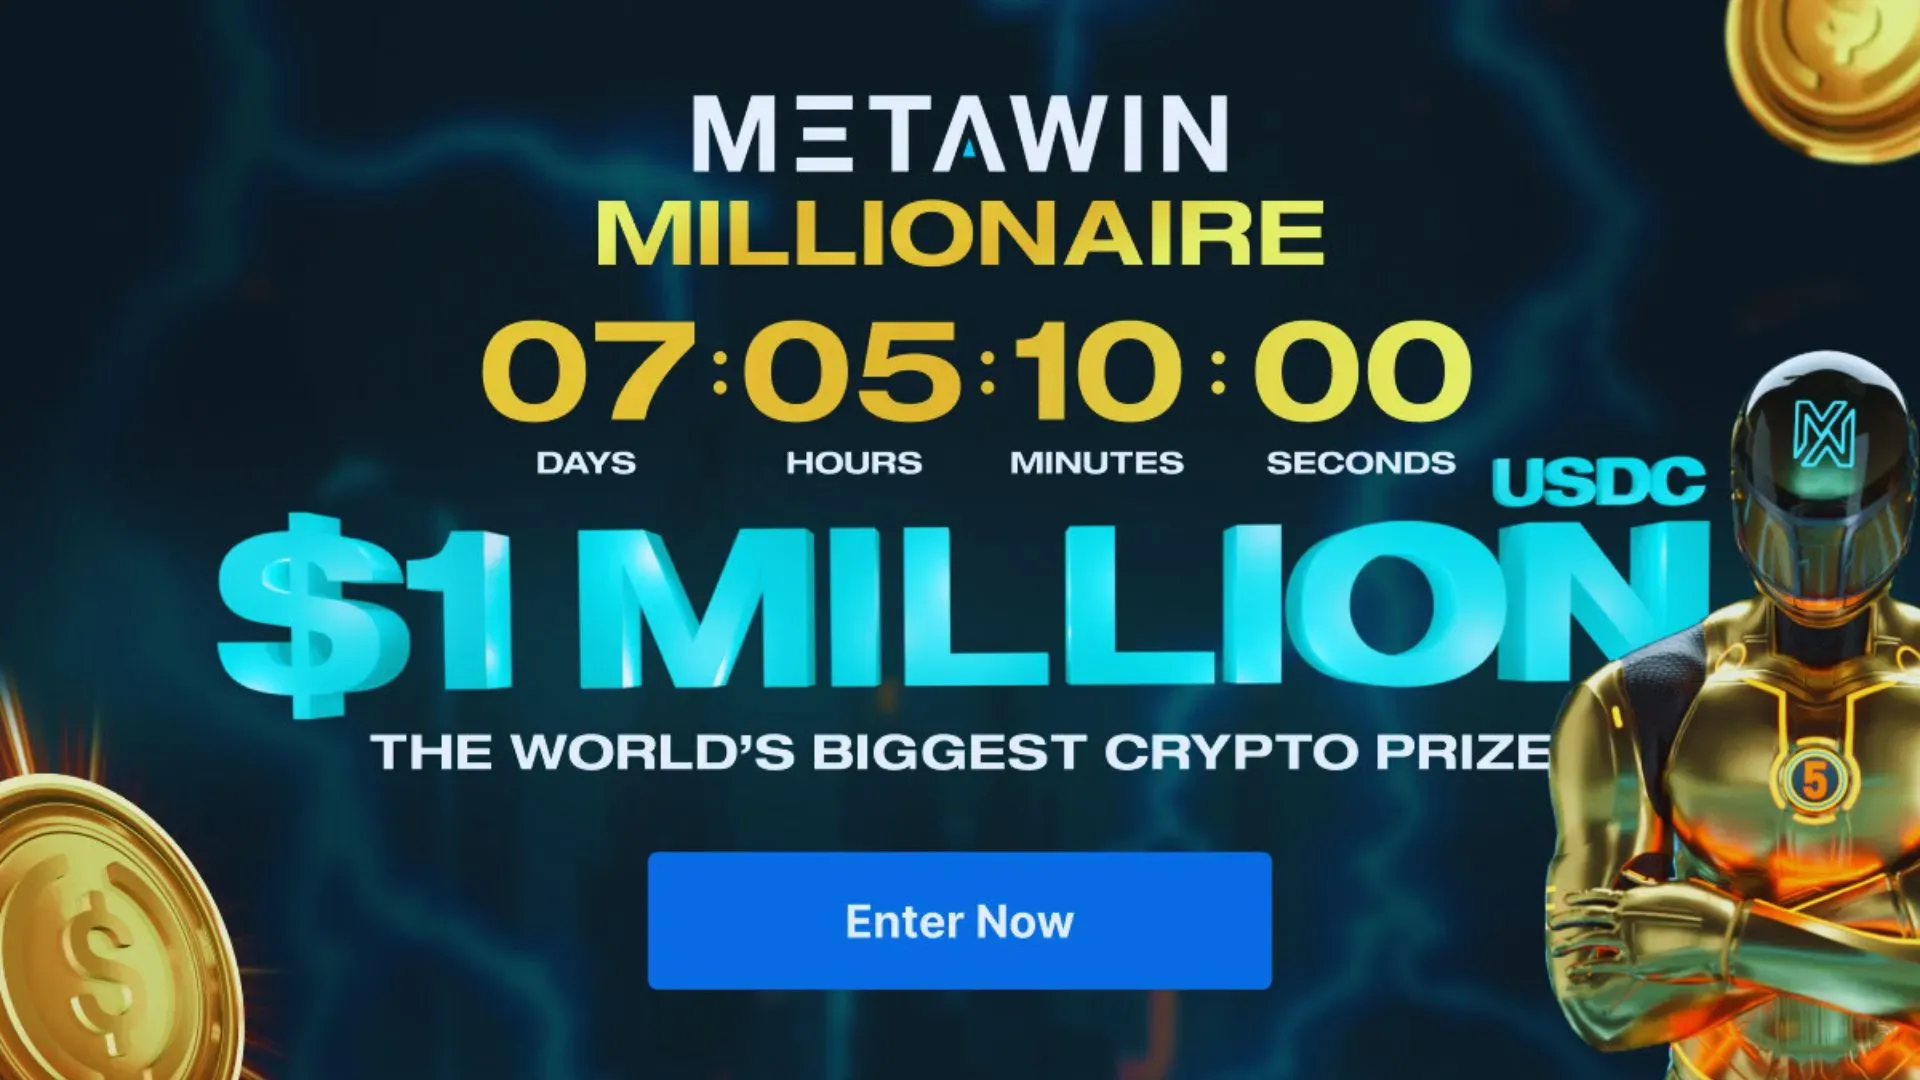 MetaWin Set For $1 Million Blockchain Prize Draw In 7 Days